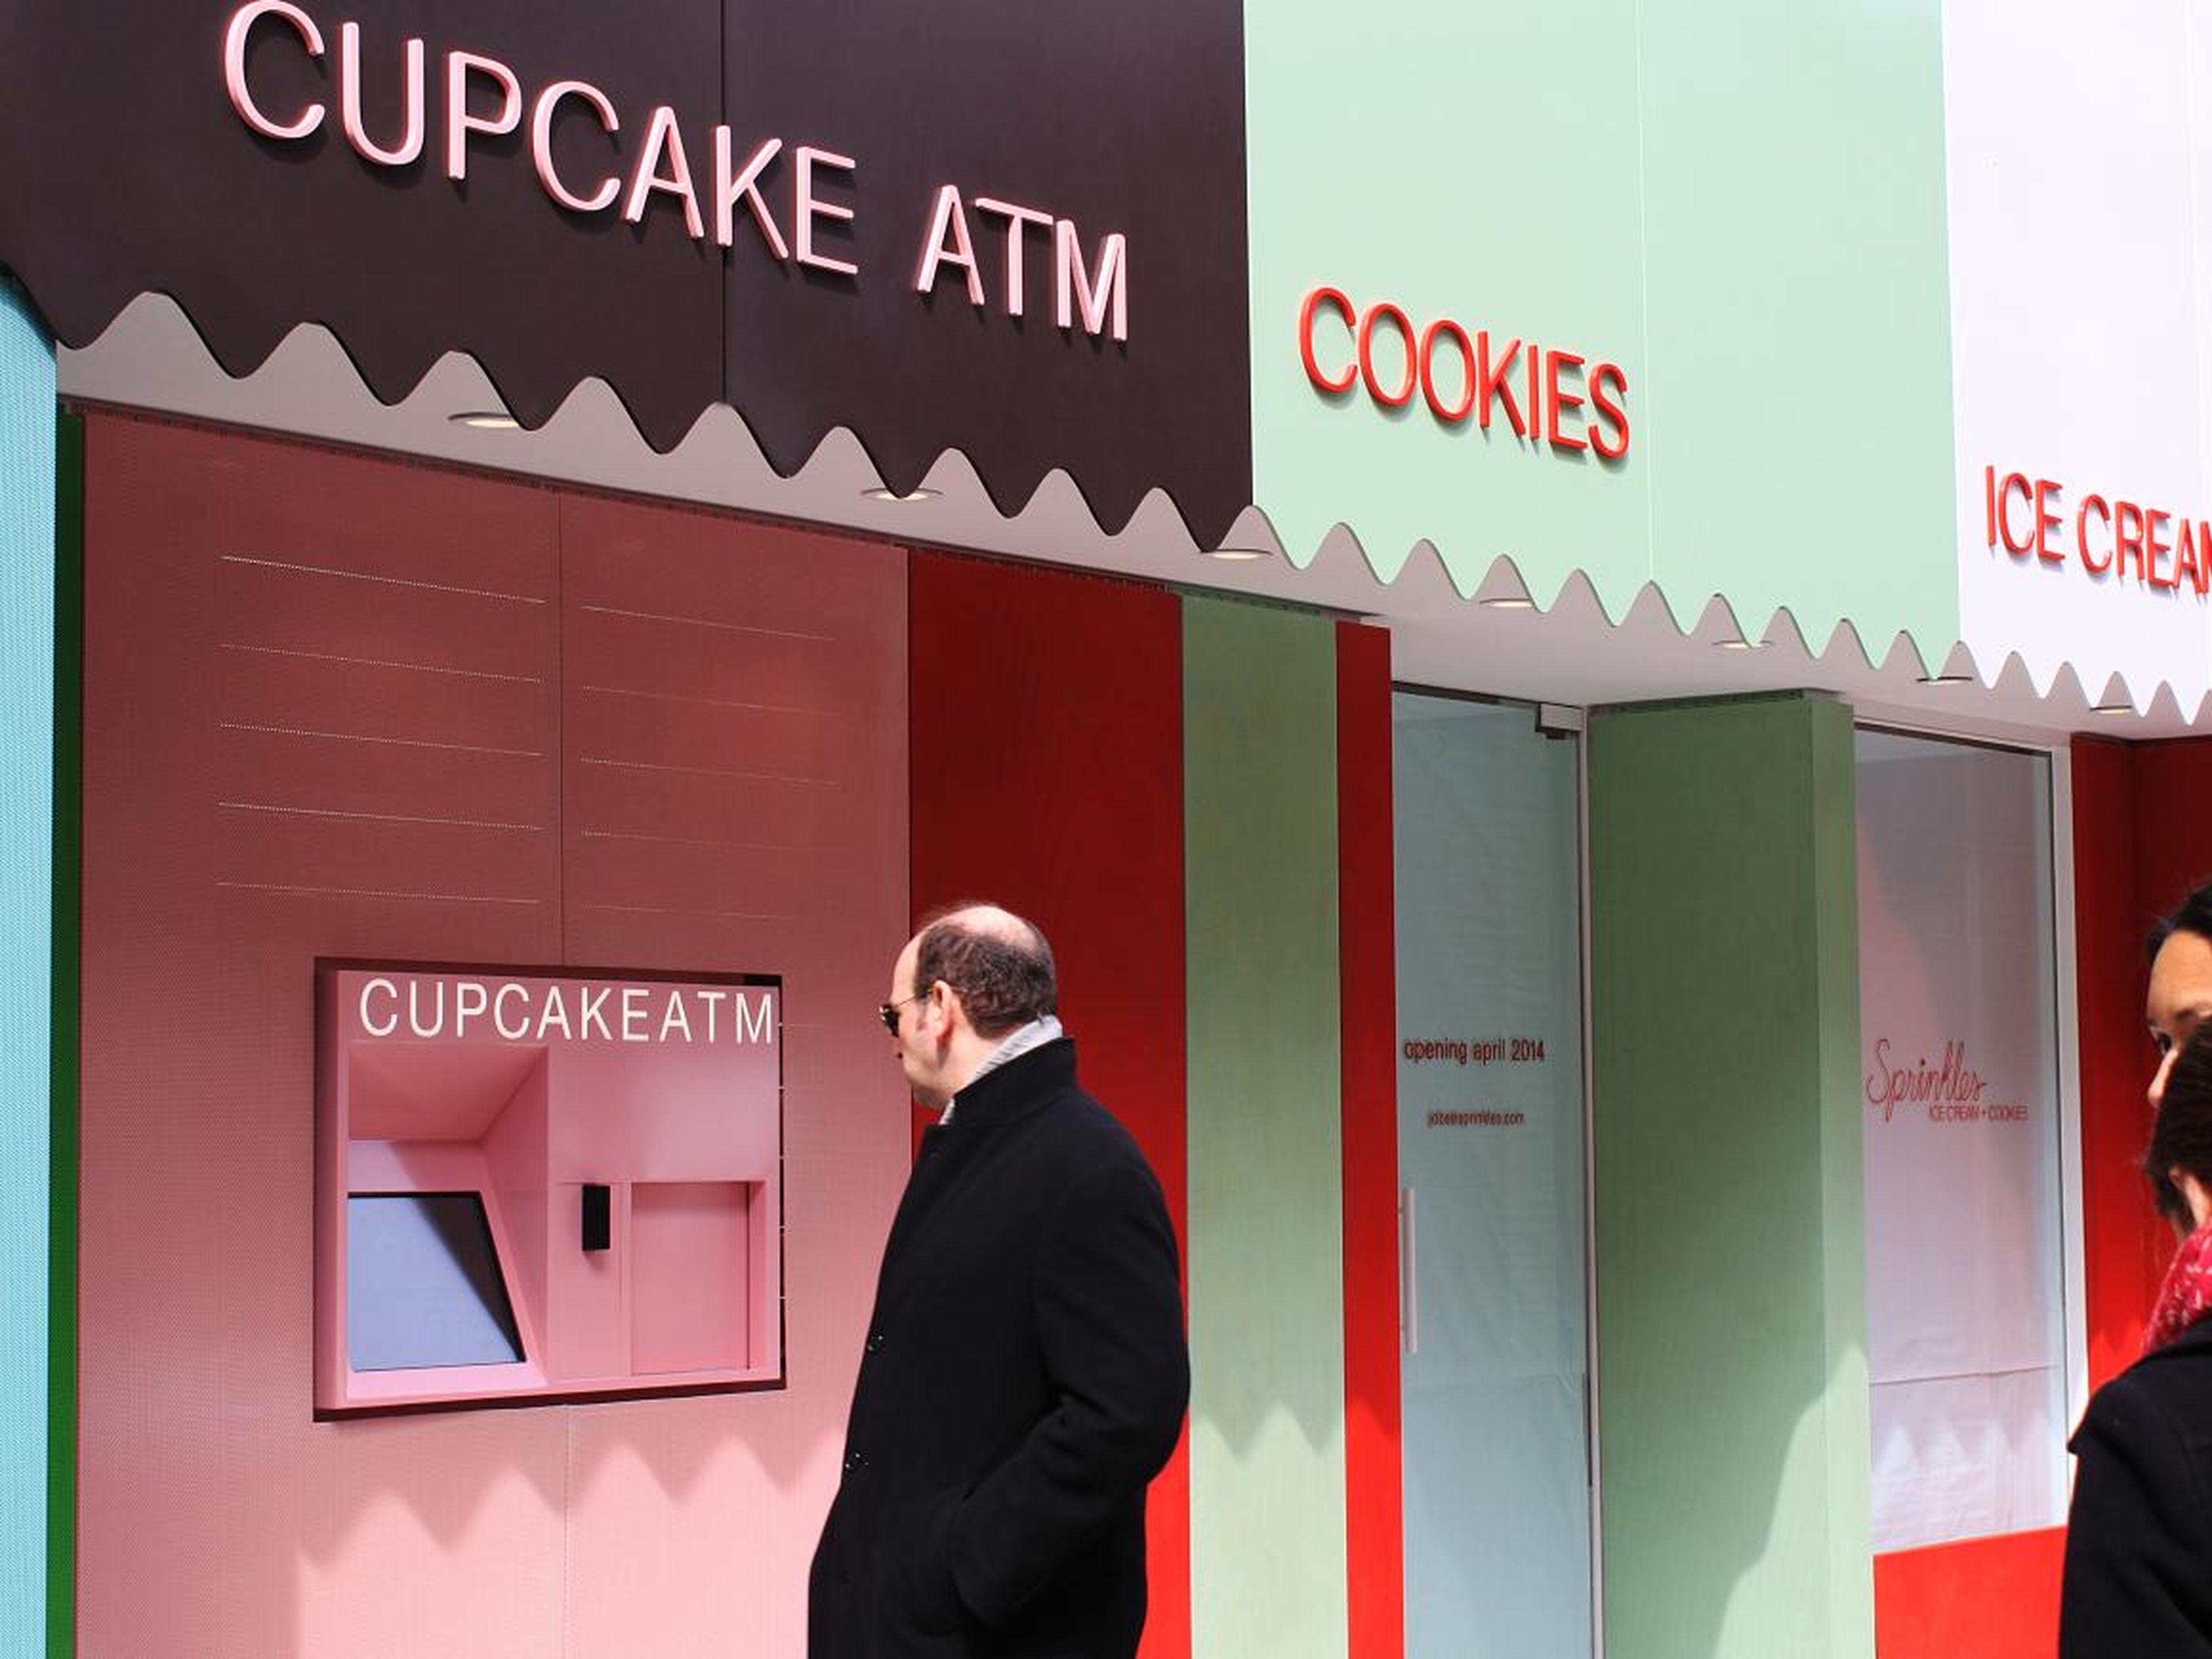 Sprinkles cupcakes has a vending machine attached to some of their stores.